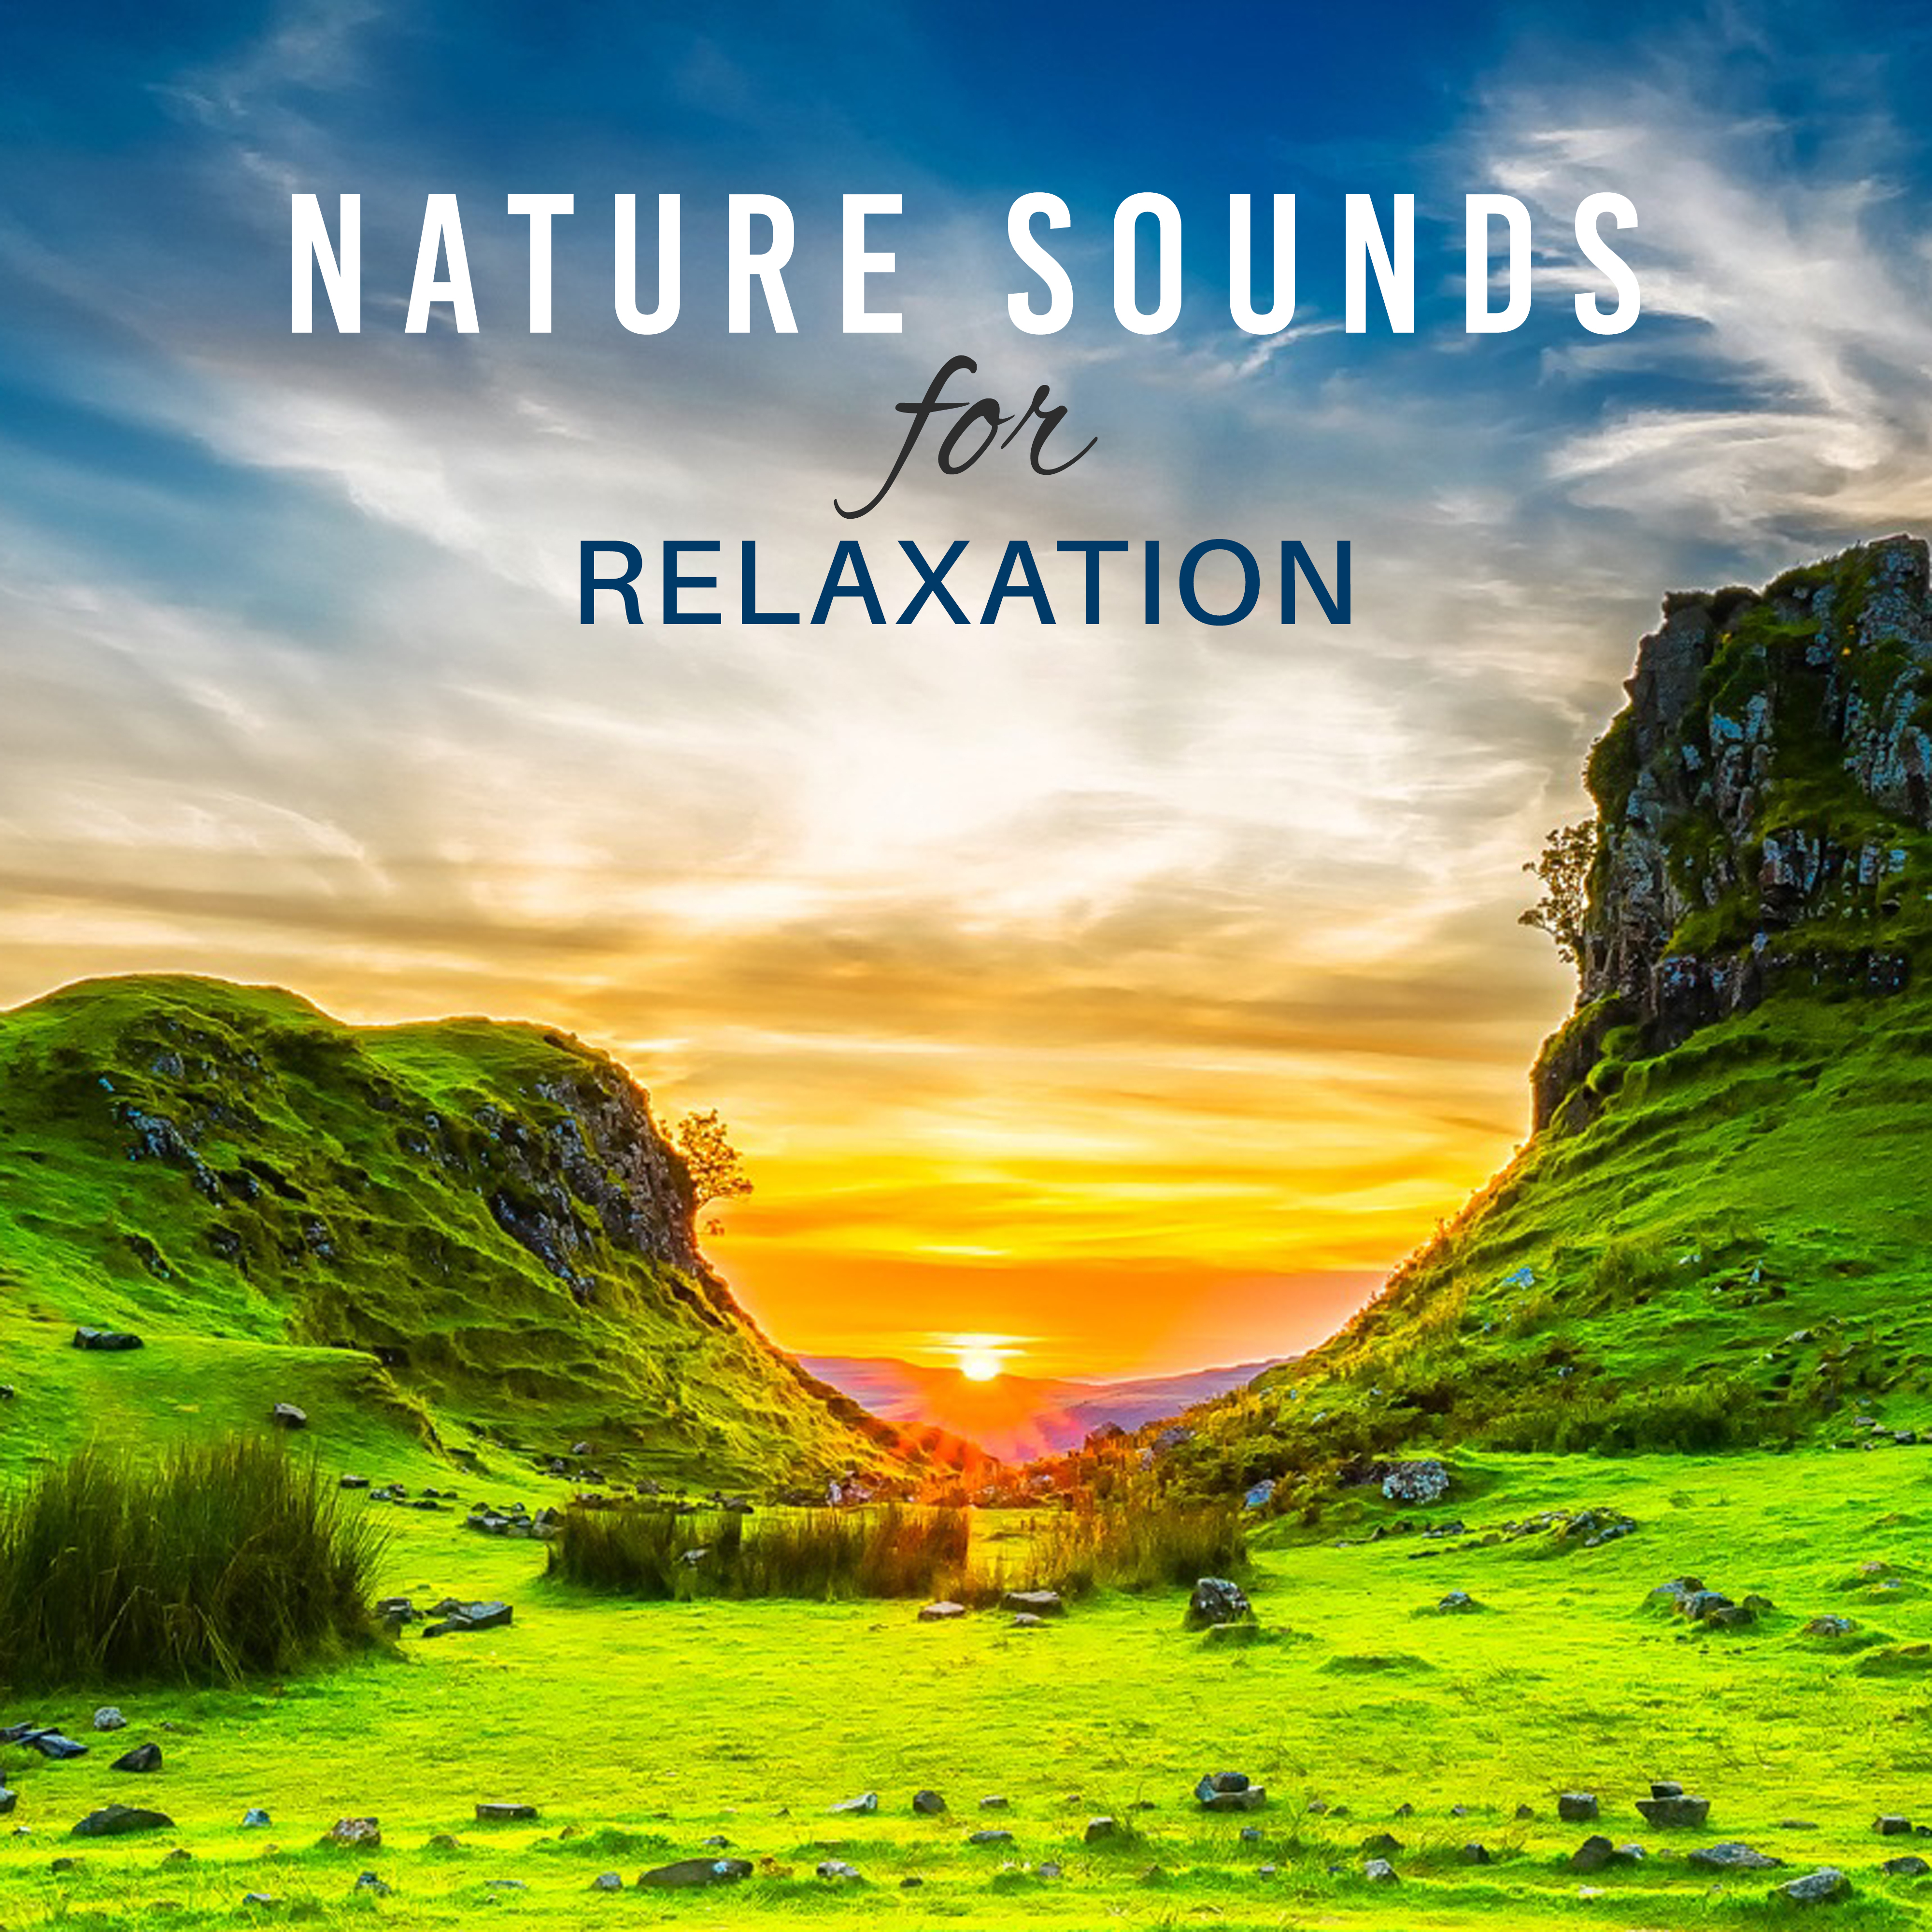 Nature Sounds for Relaxation – Soft Music to Rest, Deep Sleep, Pure Mind, Relax, Meditation, Soothing Rain, Gentle Wind